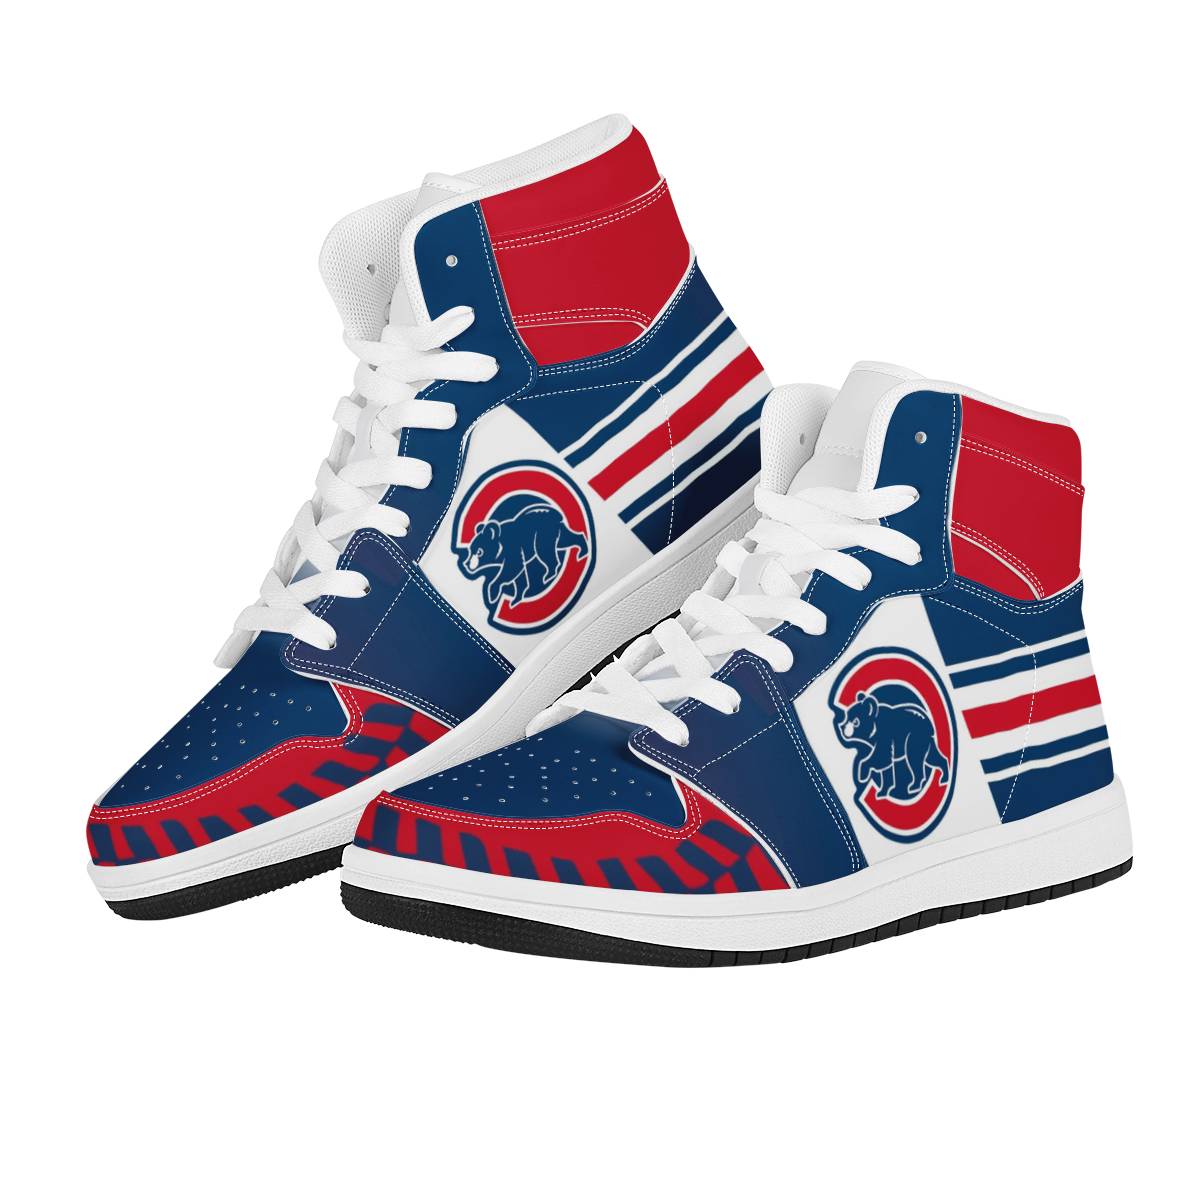 Women's Chicago Cubs High Top Leather AJ1 Sneakers 002